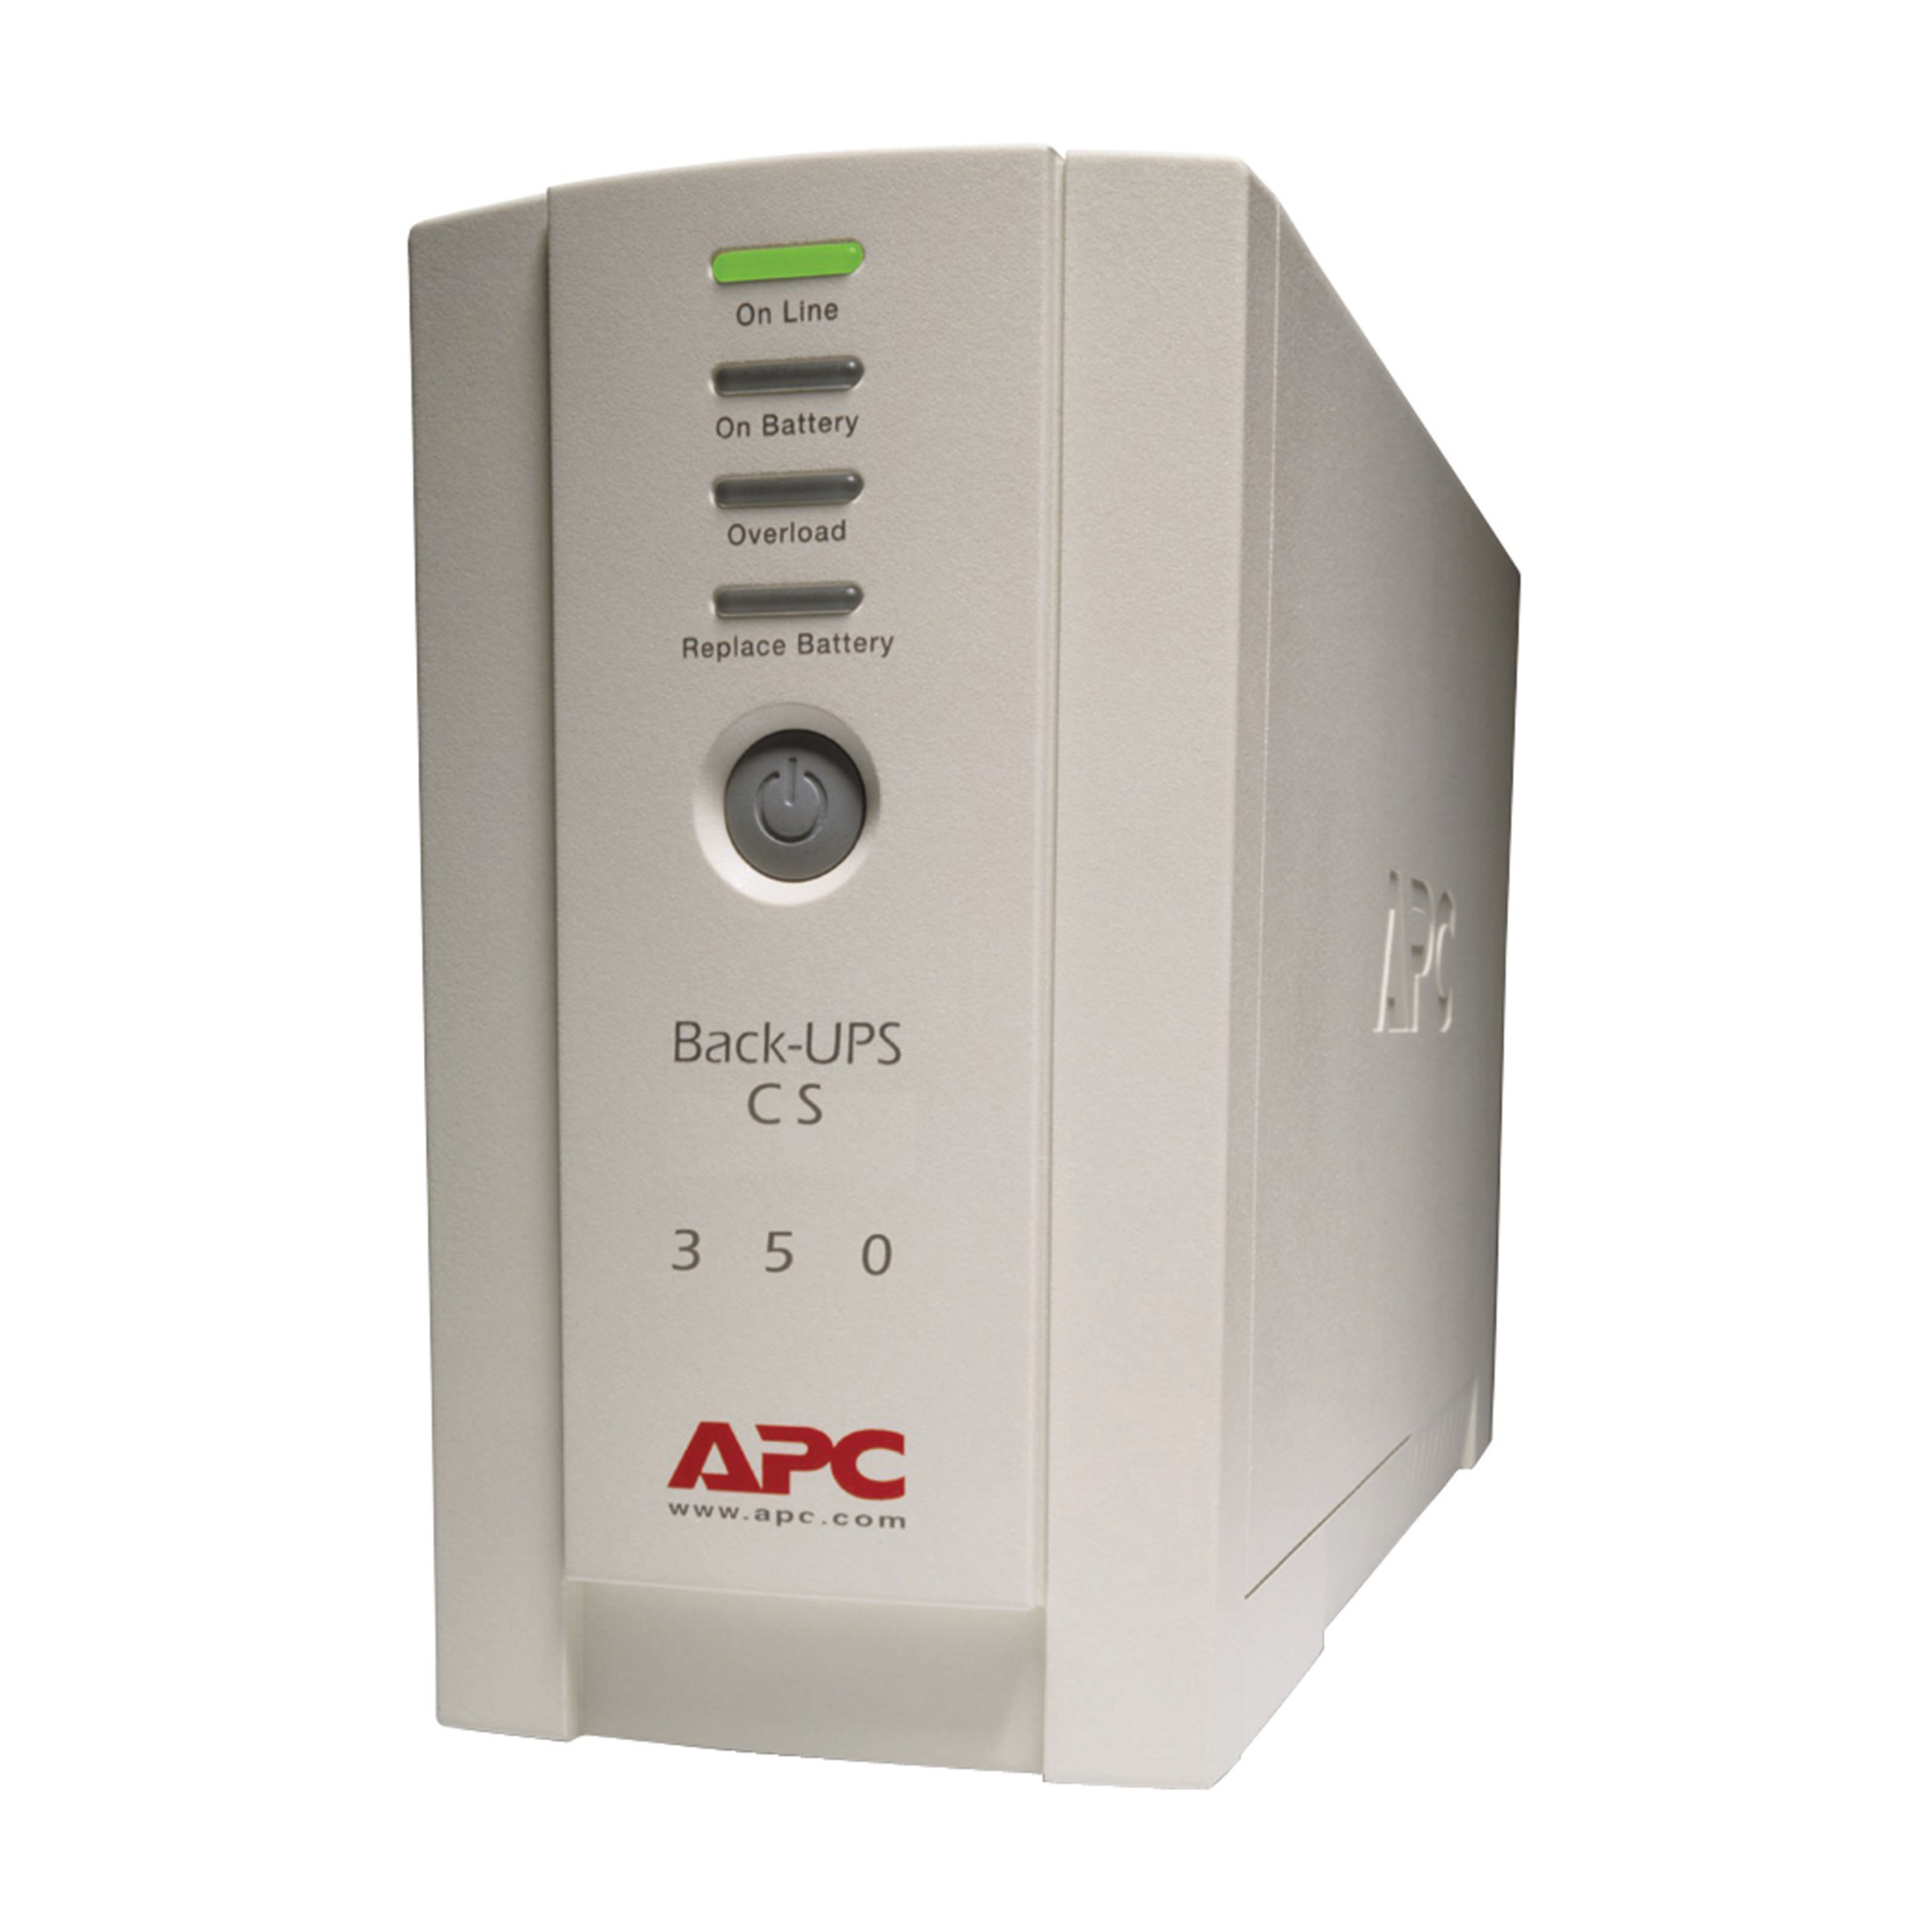 APC, Back-UPS Tower with 6 Outlets, Running Watts 210 W, Model BK350